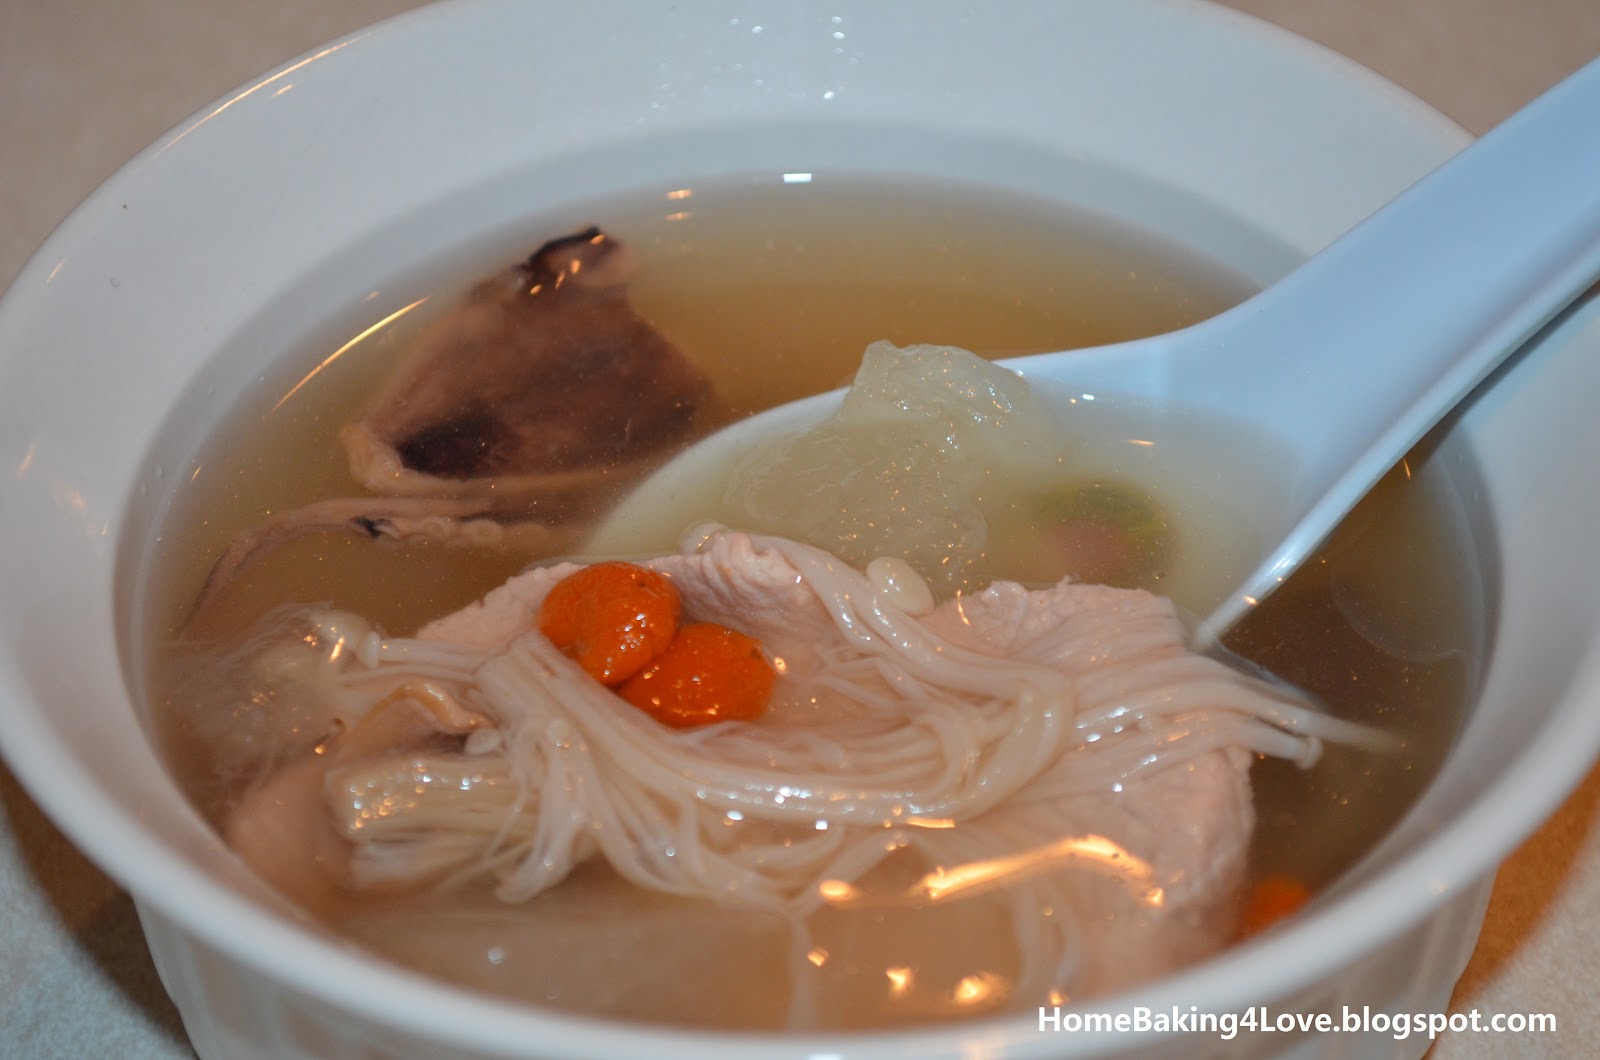 Home Baking 4 LoVe: Winter Melon Soup with Dried Octopus & Enoki ...